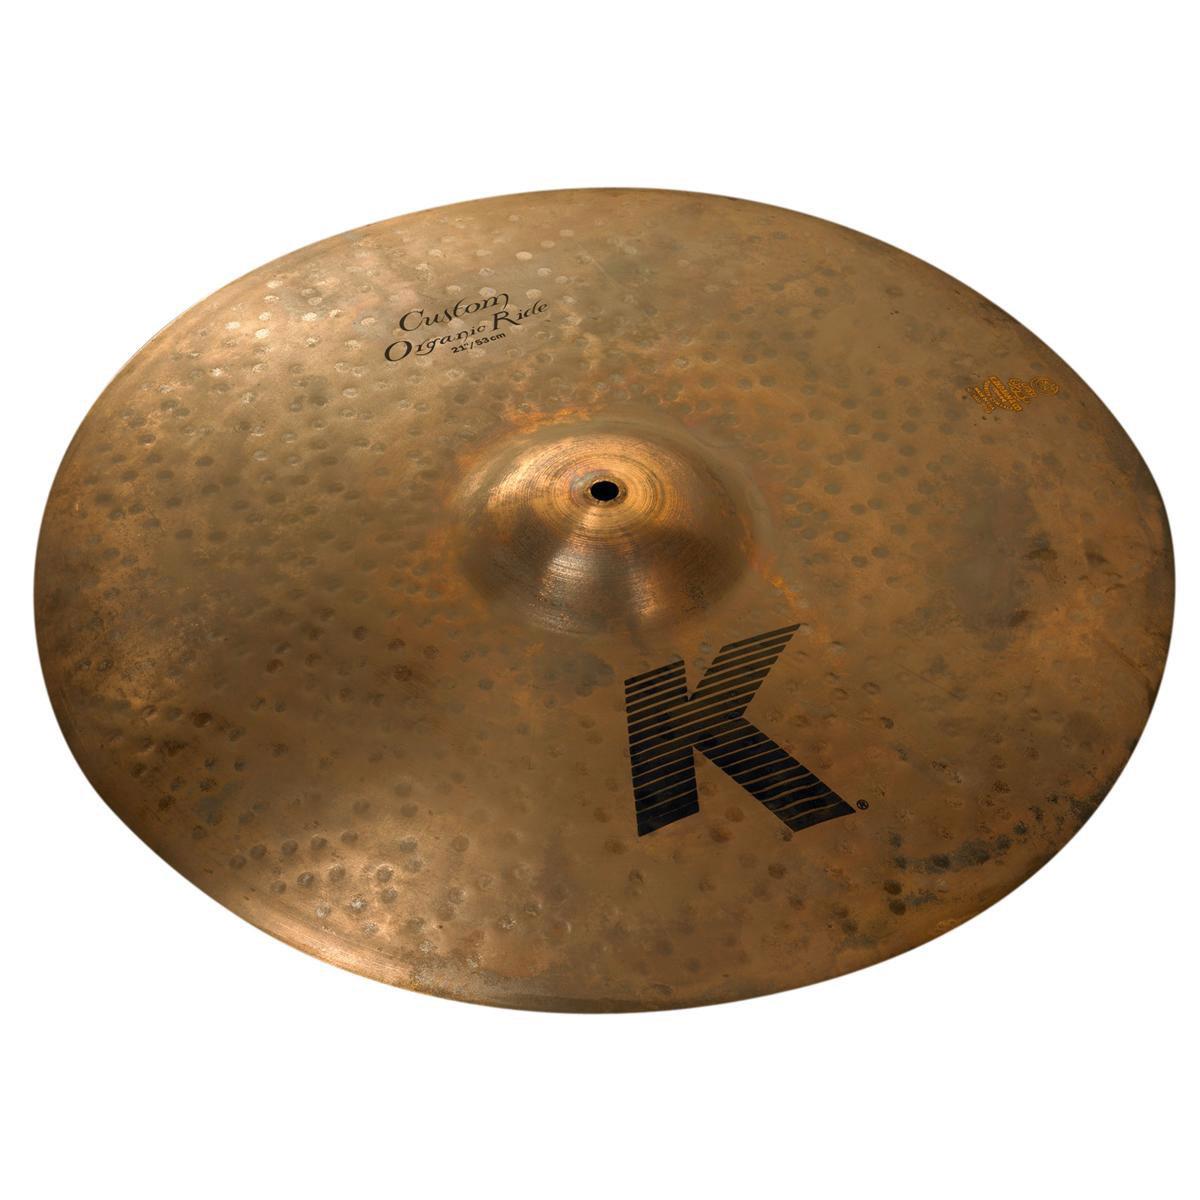 Zildjian 21" K Custom Organic Ride Cymbal Zildjian is proud to introduce a versatile cymbal to the K Custom lineup: the 21" Organic Ride, designed in conjunction with renowned educator Pat Petrillo. Its wire-brushed finish on top gives it clean, articulate stick definition. The buffed unlathed bottom allows the cymbal to open up, giving it plenty of crashability without washing out.Drawing from the spirit of the legendary K Zildjian range, K Custom cymbals are dark, rich and dry and enable today's drummers to utilize complex K sounds in a more modern musical environment.  They feature traditional K hammering, plus a variety of additional modern hammering techniques that produce unique sonic capabilities.   Recommended for modern jazz, studio, country and medium rock.  K Customs are designed with today's diverse music scene in mind.